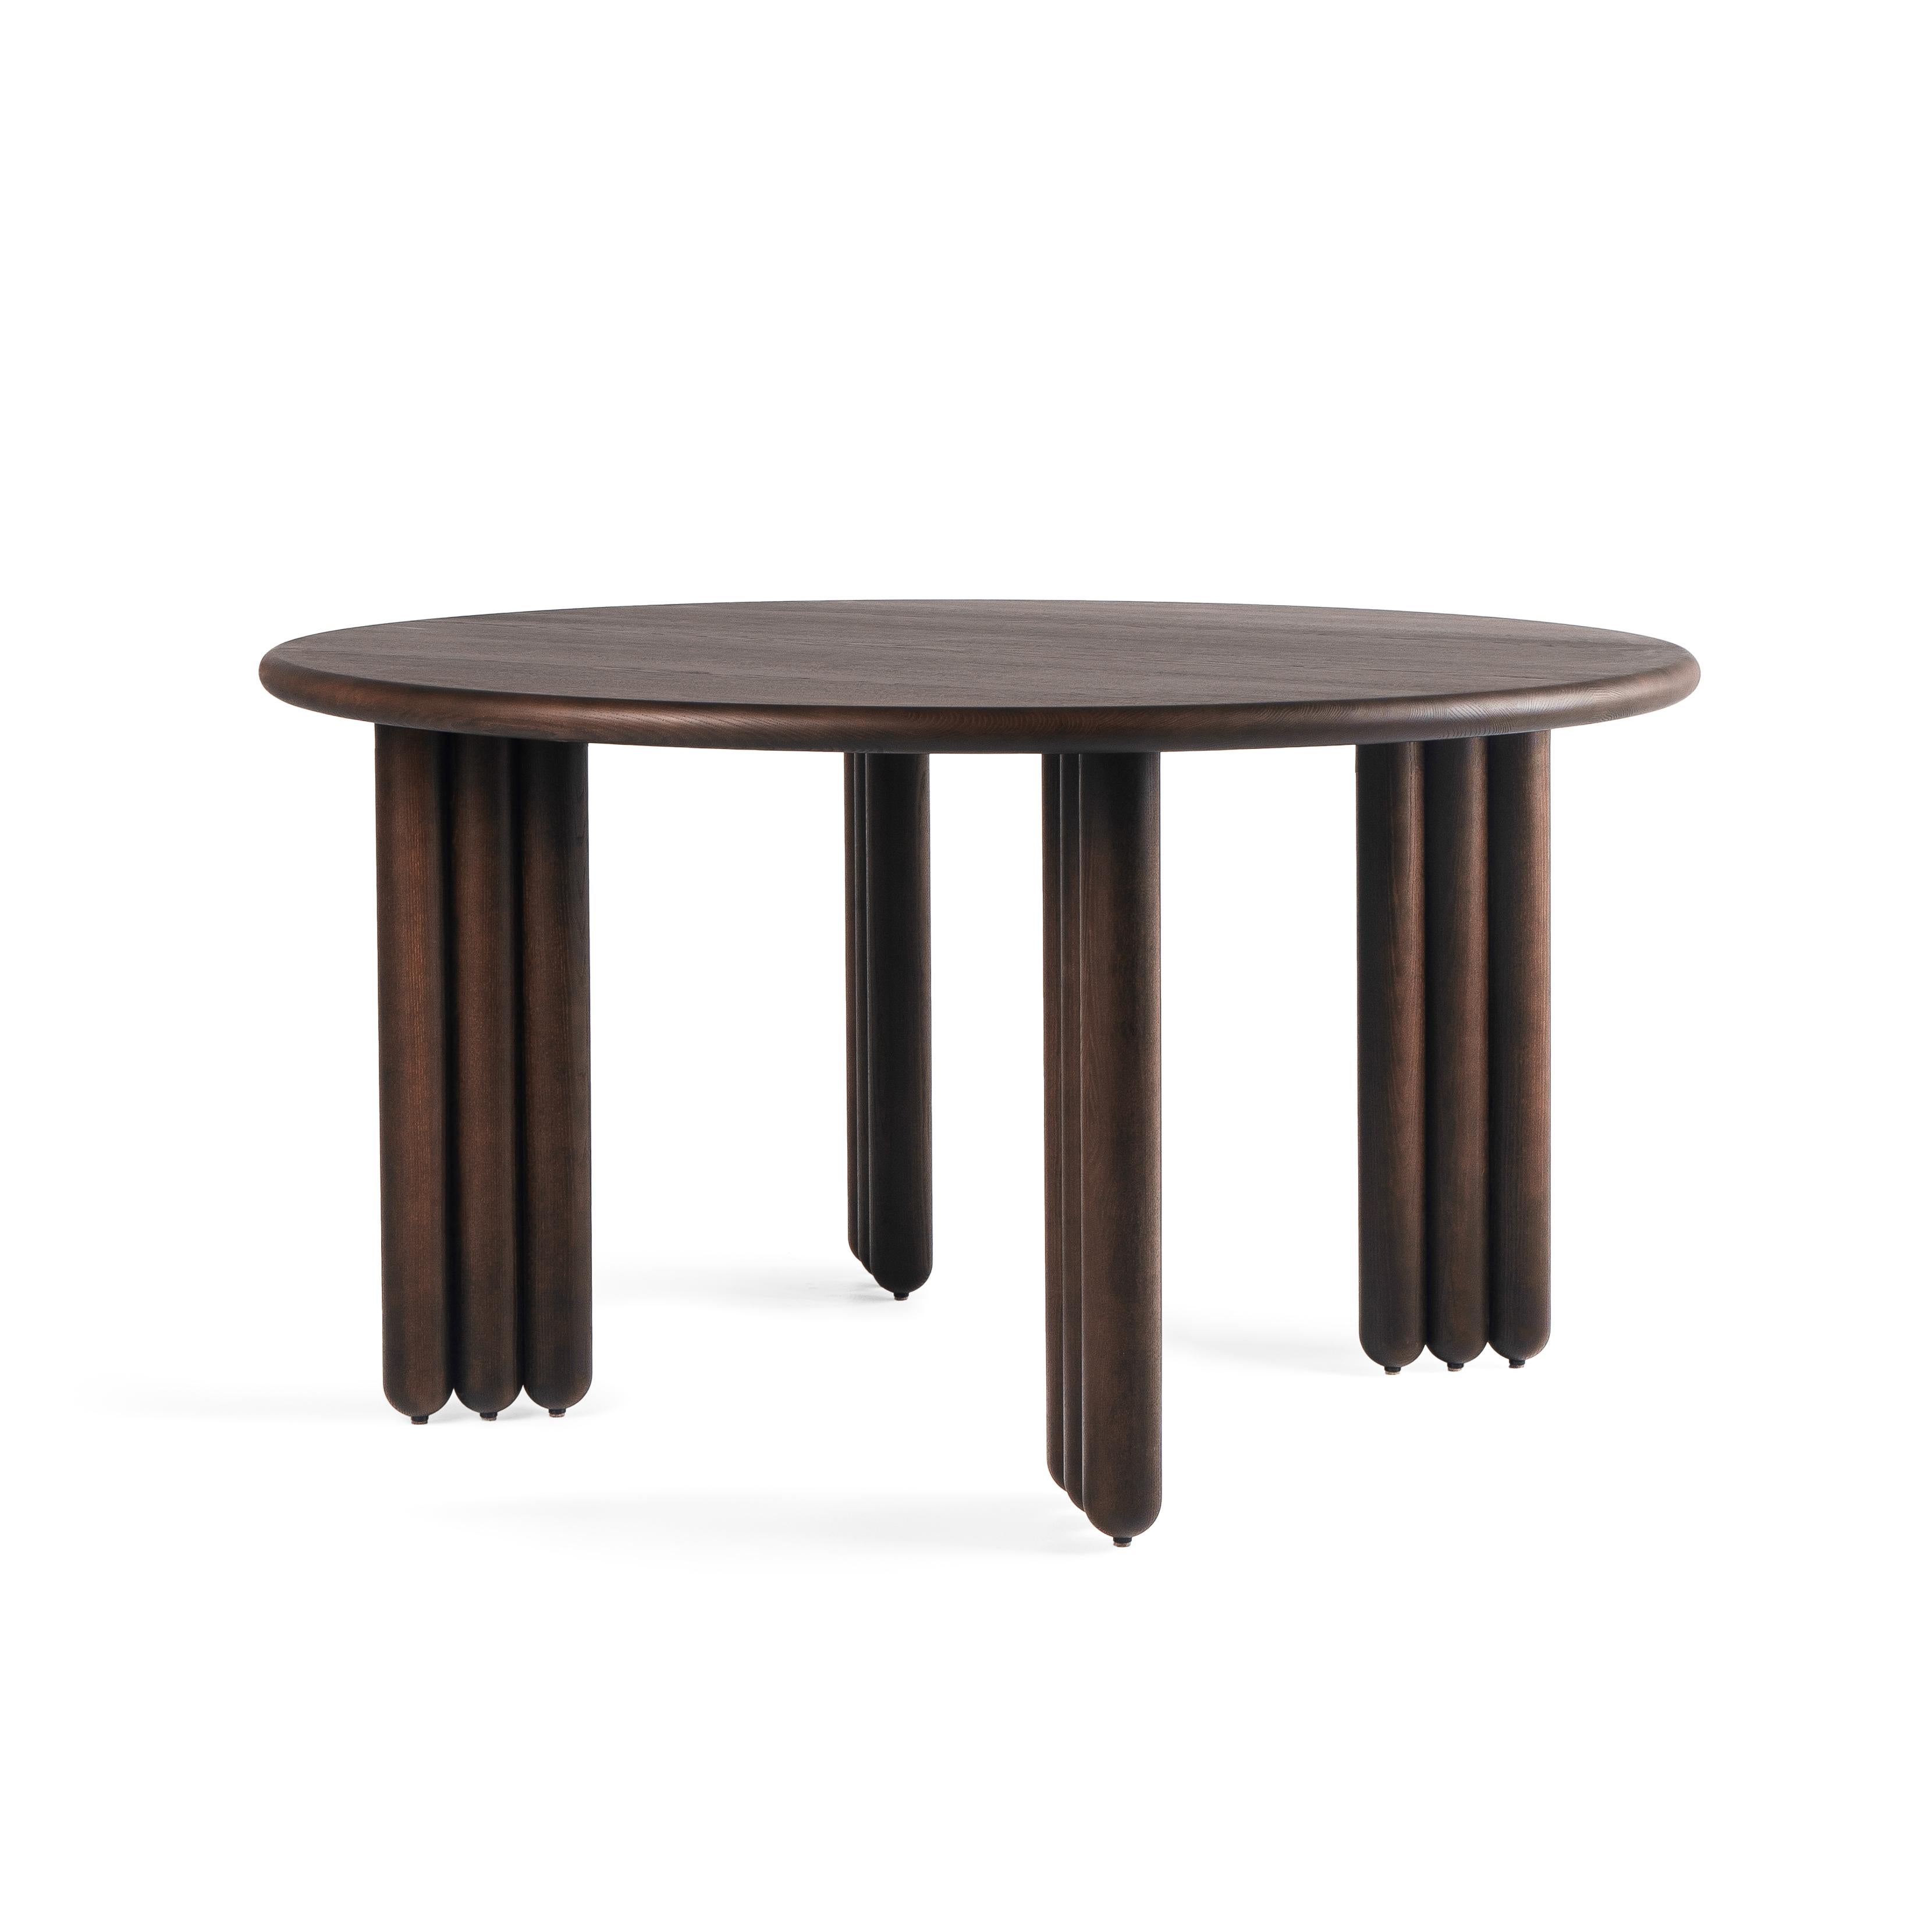 Ukrainian Contemporary Dining Round Table 'Flock' by Noom, 140 cm For Sale